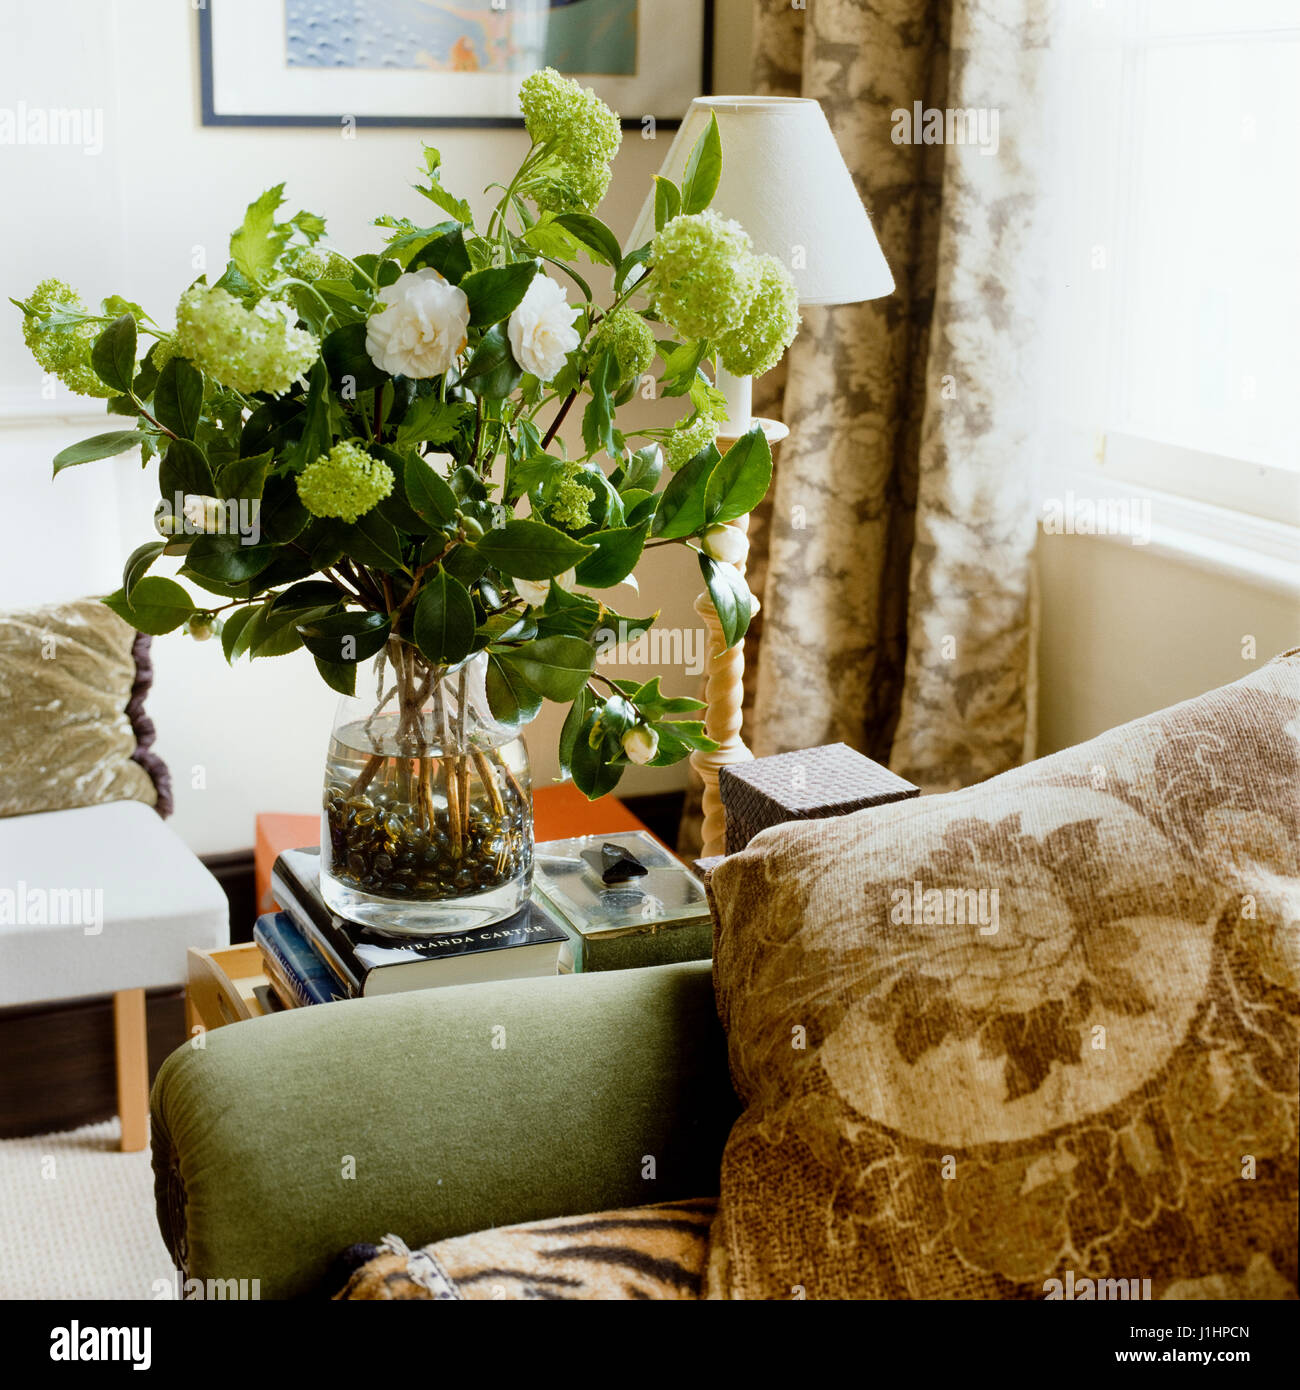 Flowers by sofa. Stock Photo